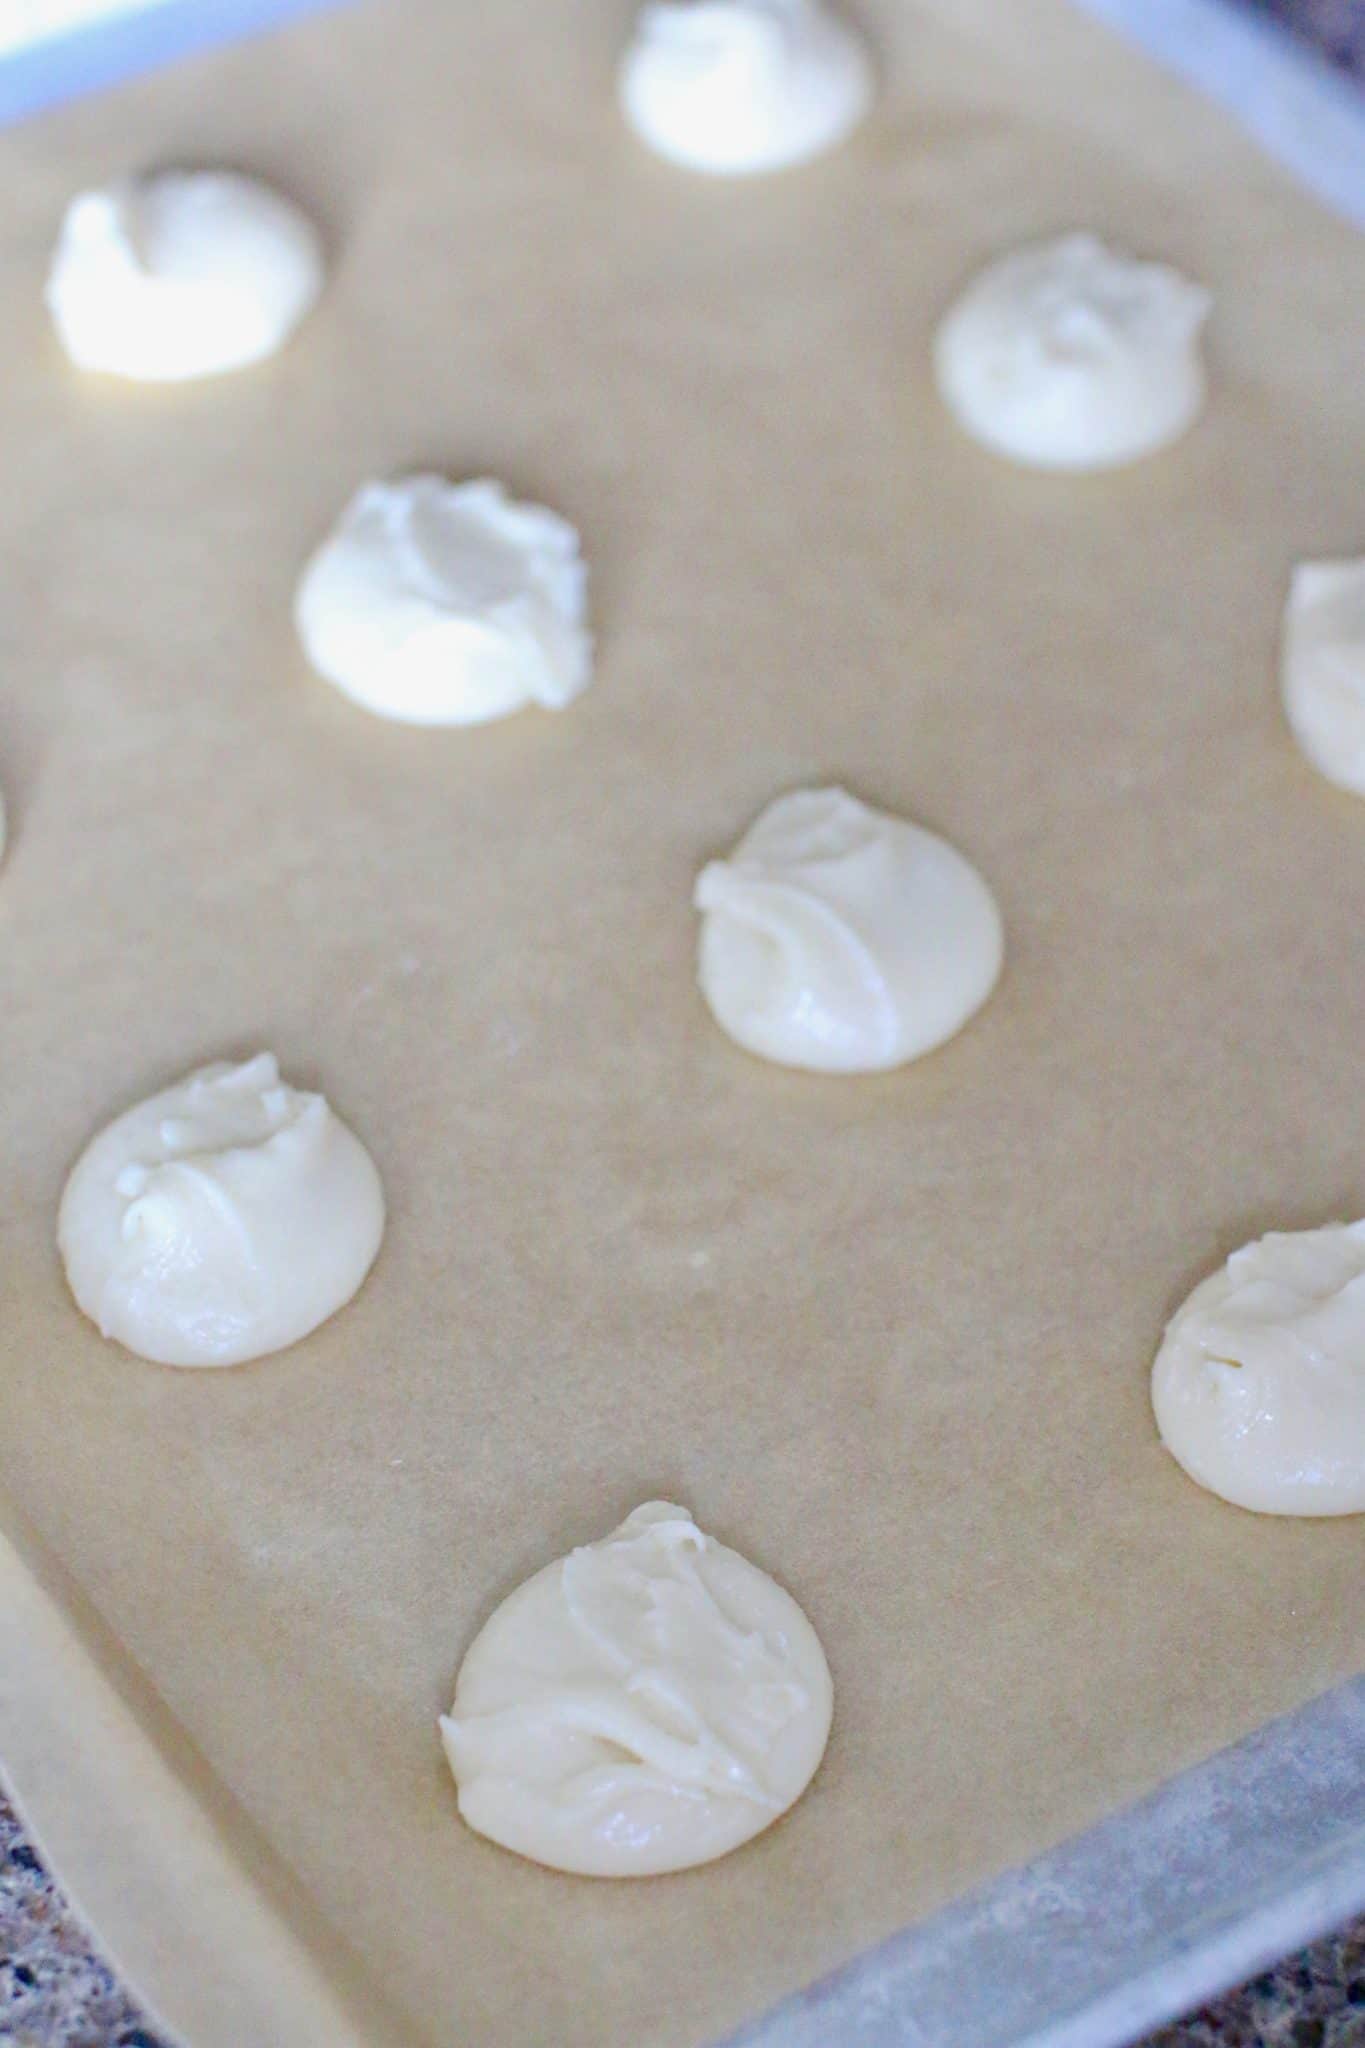 cookies on parchment-lined baking sheet.